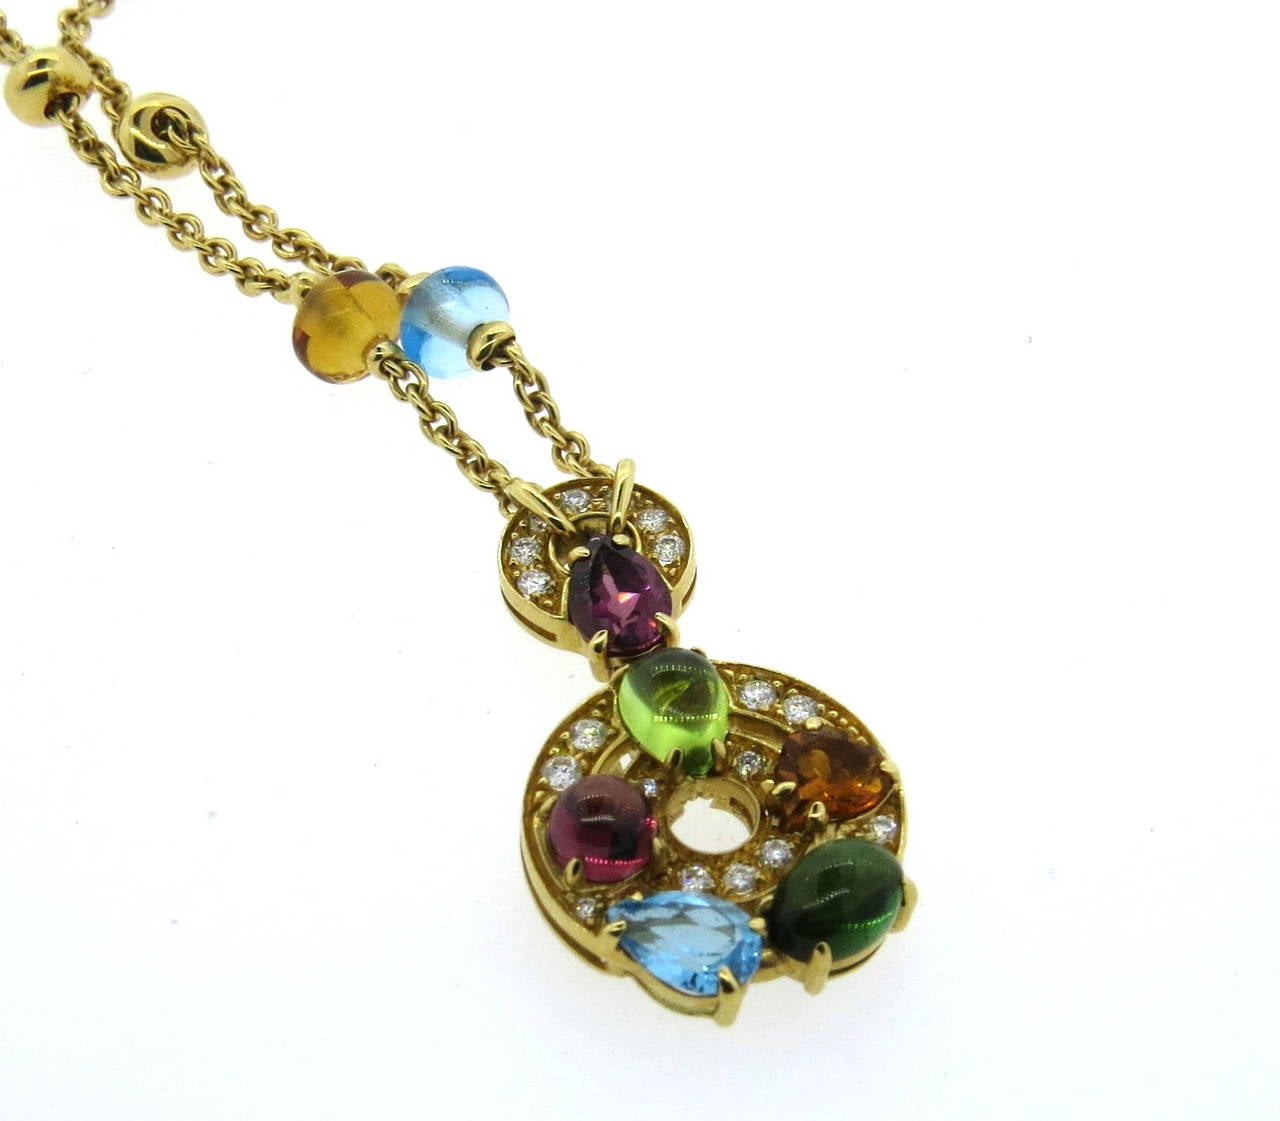 Bulgari 18k gold necklace with pendant from Concentrica collection, crafted with approx. 0.25ctw in G/VS diamonds , blue topaz, tourmaline, citrine and peridot. Necklace length is adjustable from 15